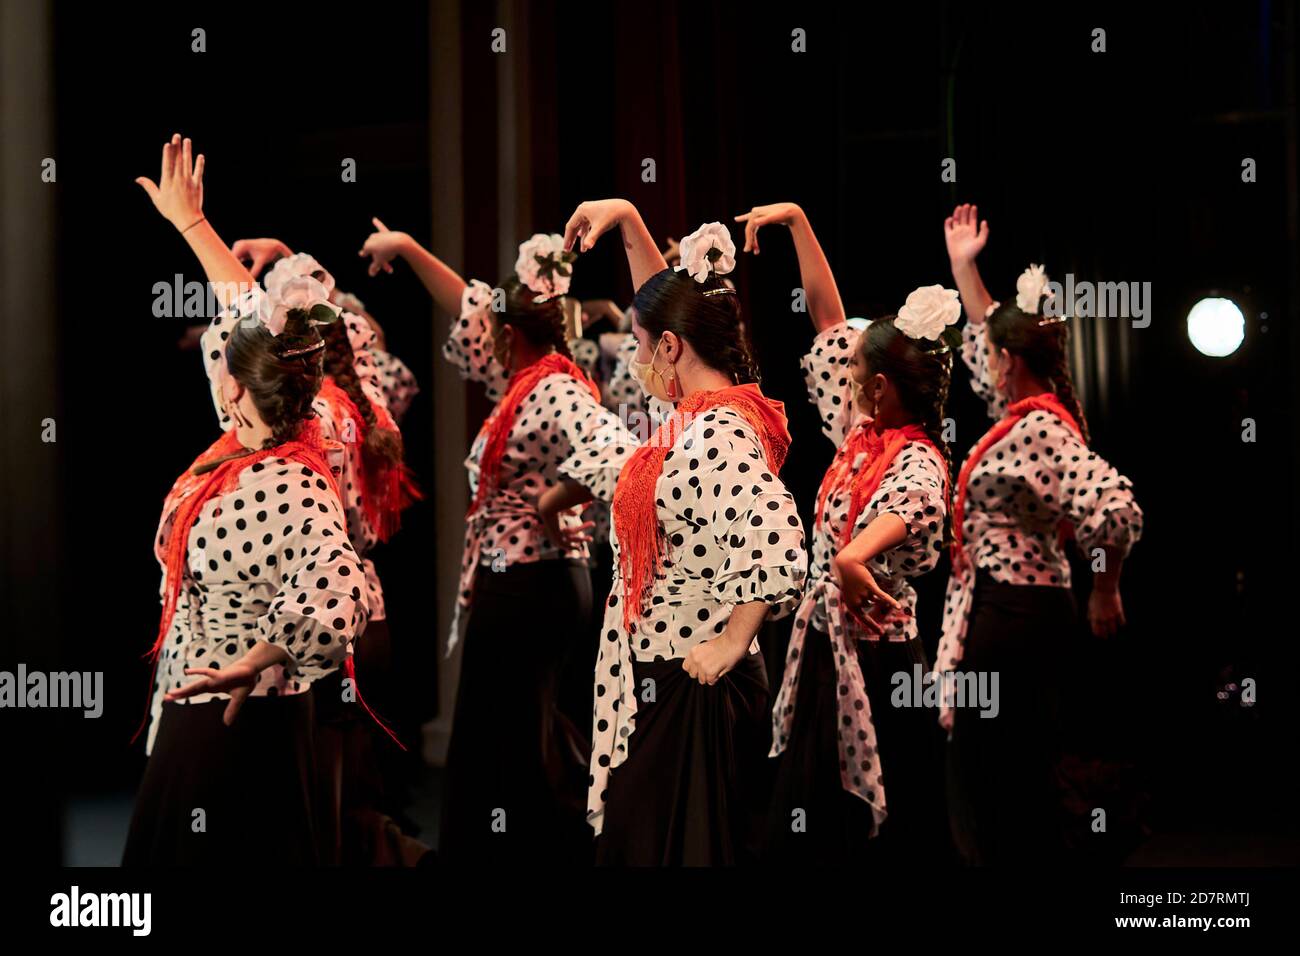 Alcala de Henares, Spain. 24 October, 2020. Dancers with face masks during the 'Volver' flamenco dance festival at Cervantes theater in Alcala de Henares, Spain. In Madrid, the capacity limitation in theaters is between 50% and 75% as a preventive measure against Covid-19. Credit: May Robledo/Alfa Images/Alamy Live News Stock Photo